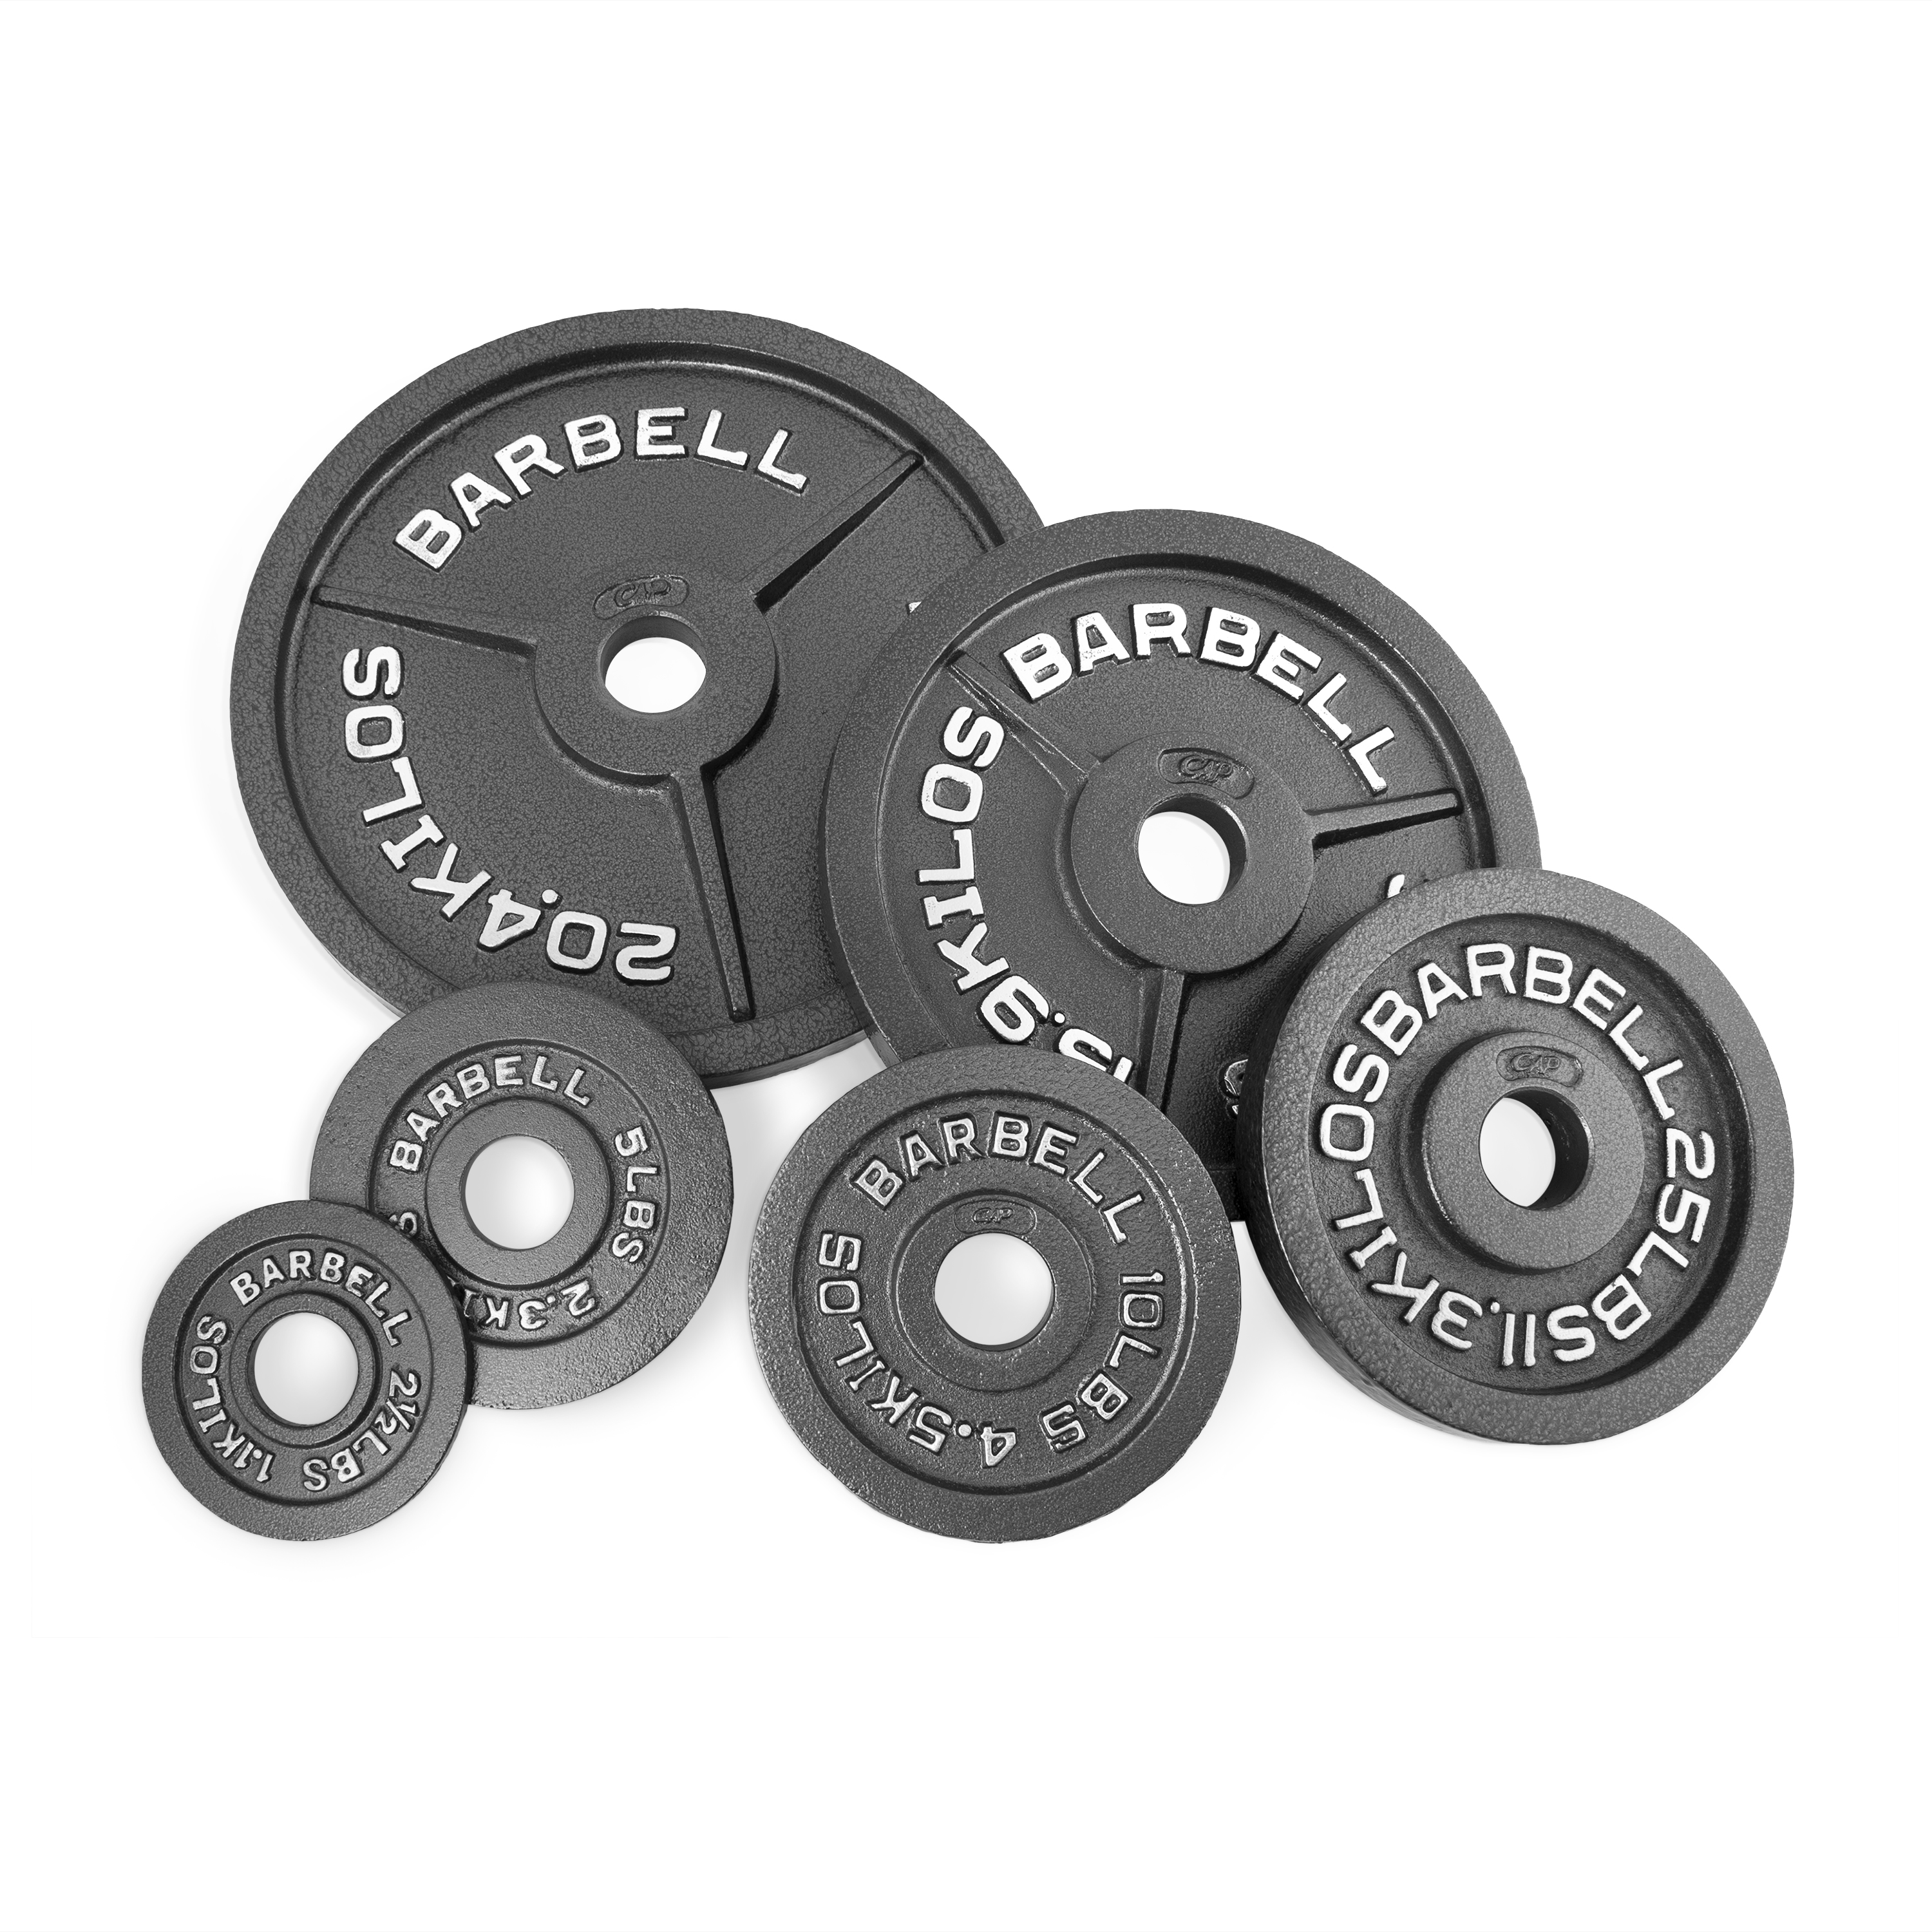 CAP Barbell 2-Inch Olympic Plate, Assorted Colors - Walmart.com